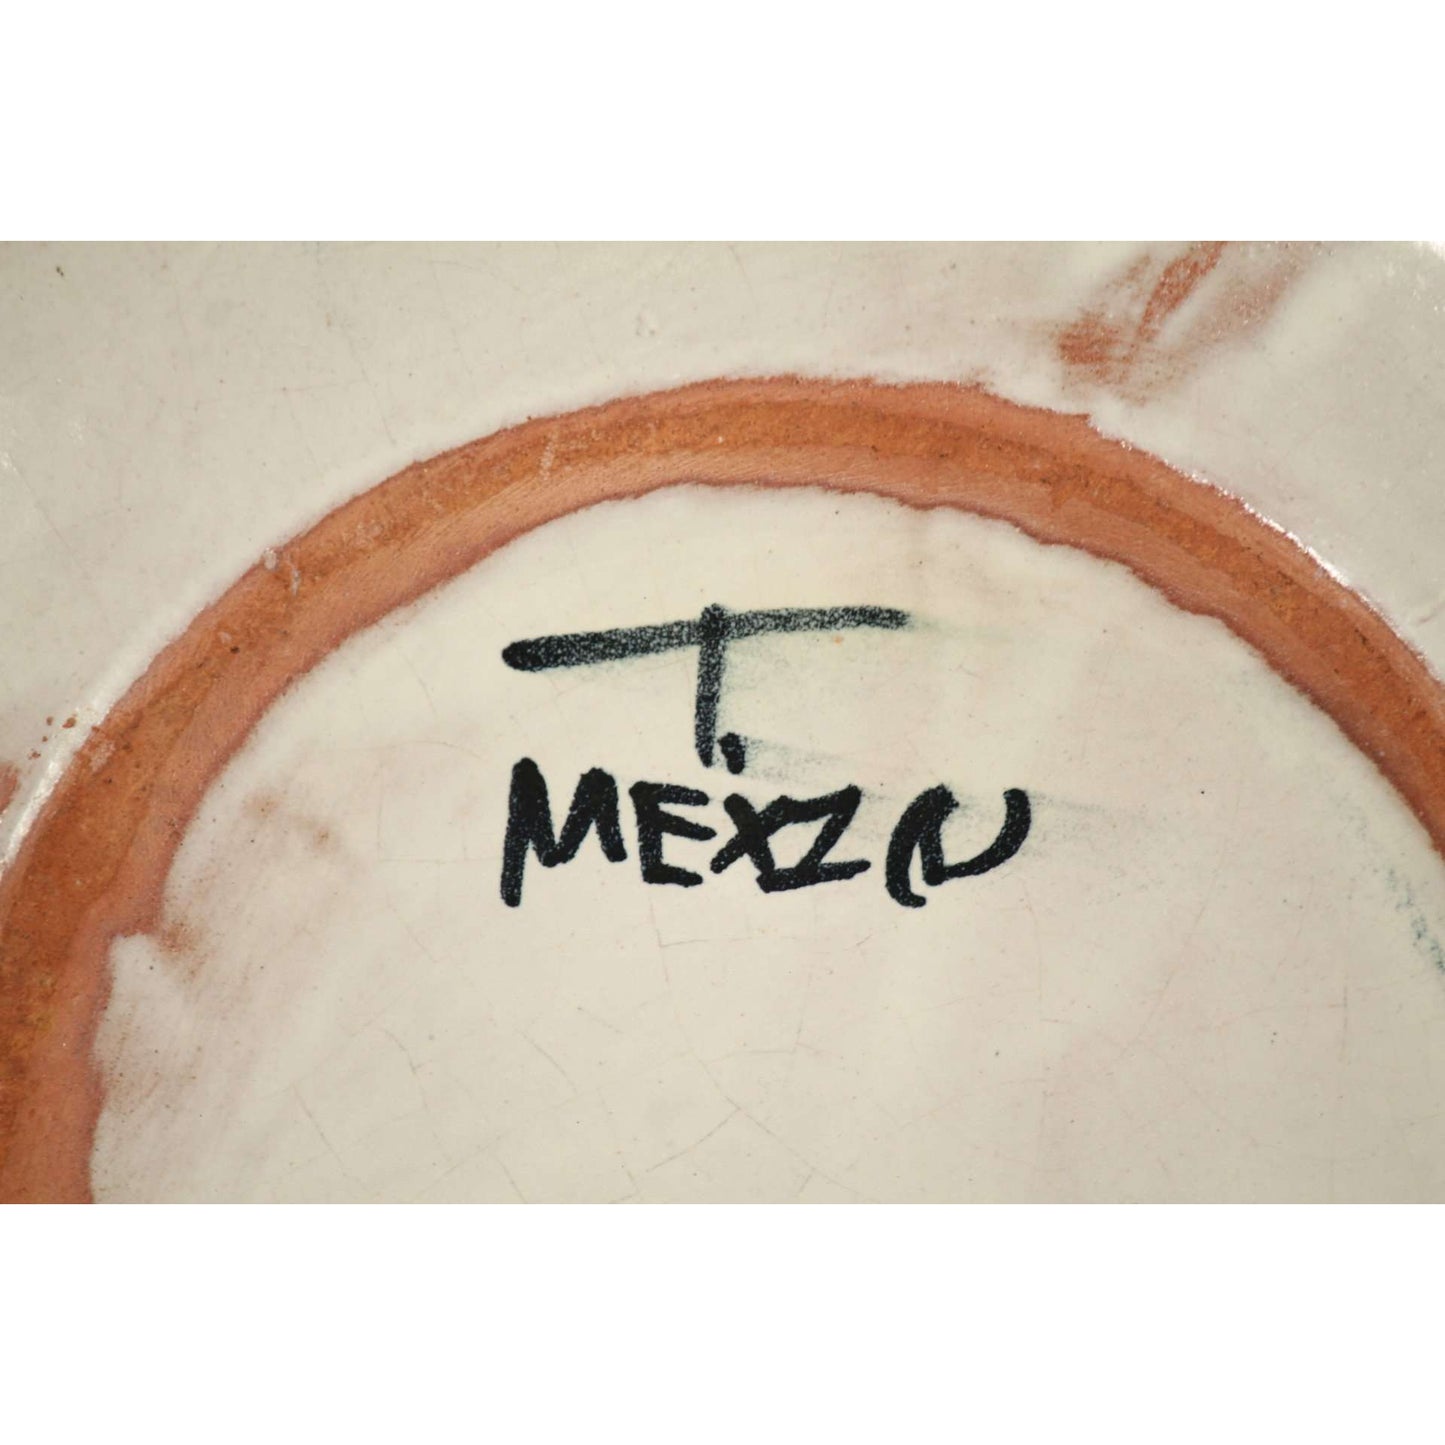 Handmade Mexican Ceramic Plate Signed